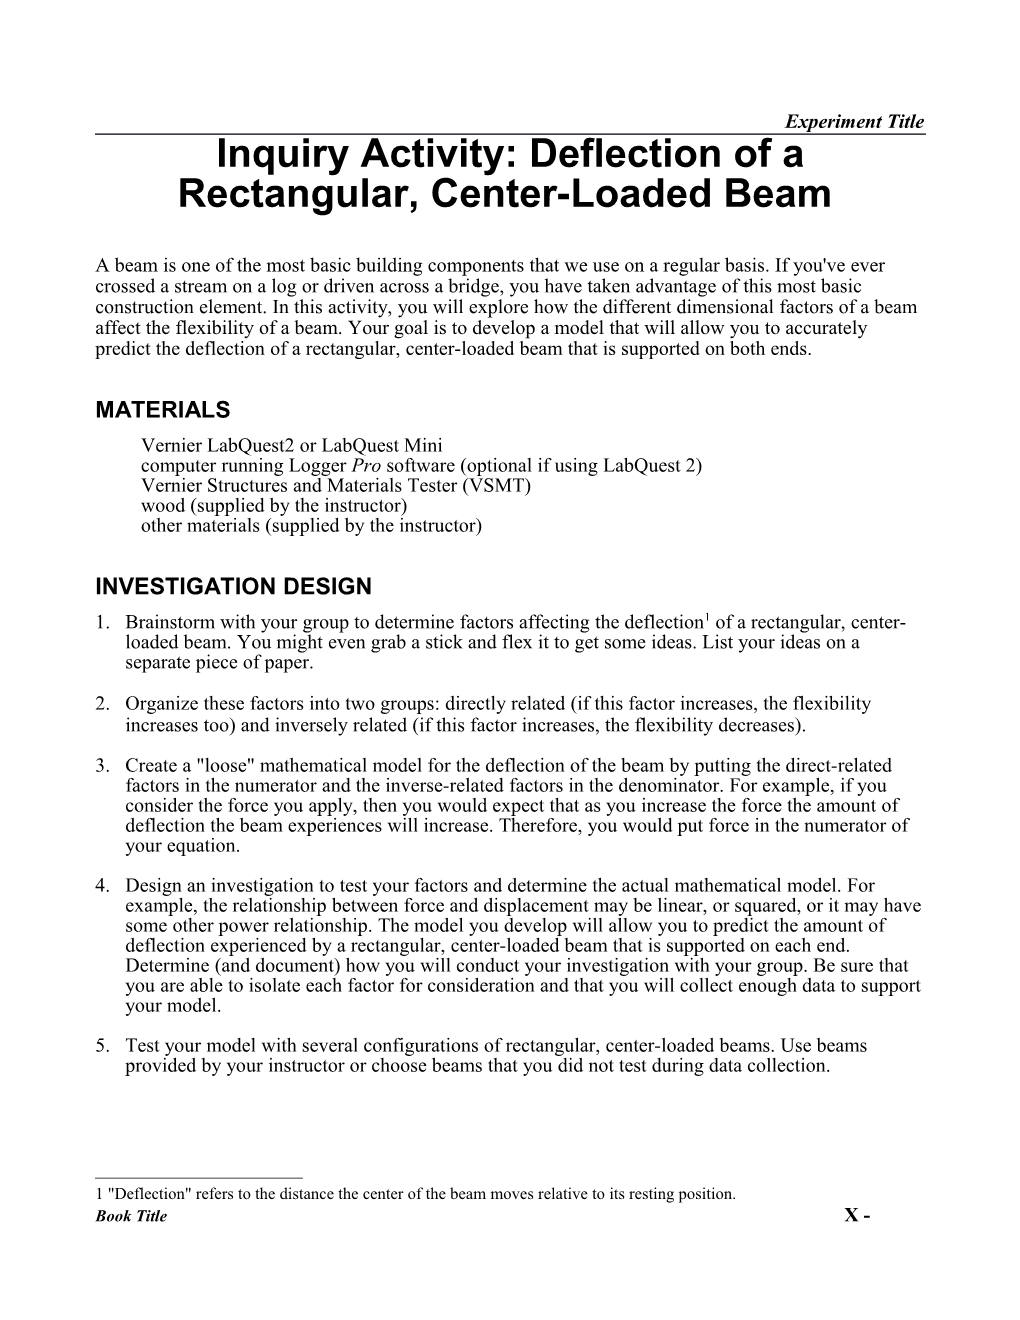 Inquiry Activity: Deflection of a Rectangular, Center-Loaded Beam